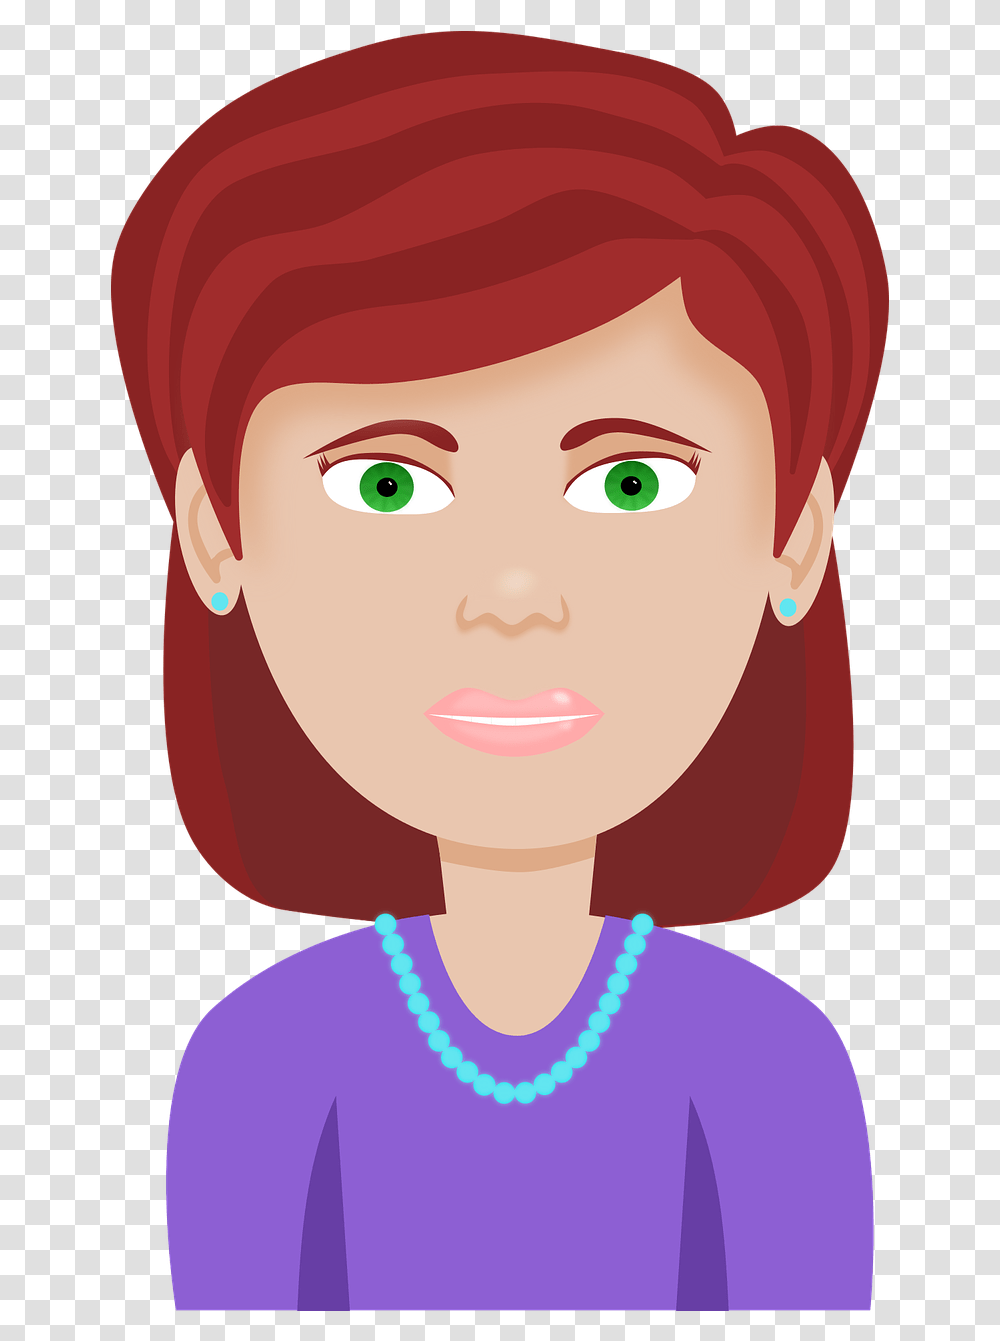 Avatar Woman Female Free Vector Graphic On Pixabay Avatar De Personas Mujeres, Face, Human, Accessories, Accessory Transparent Png